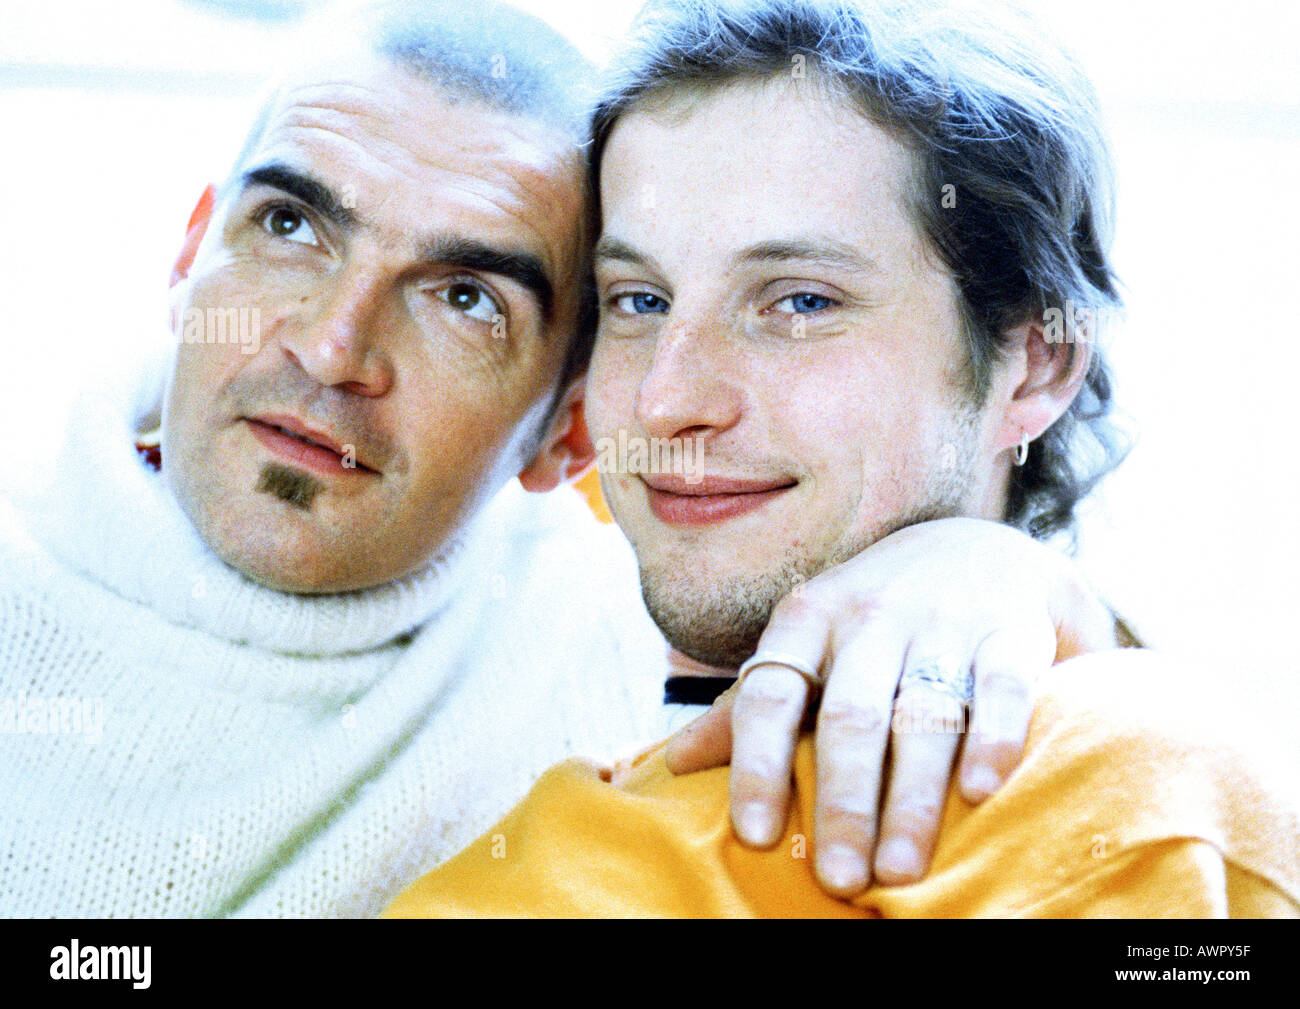 Two men sitting, man's arm around the other's neck, portrait. Stock Photo